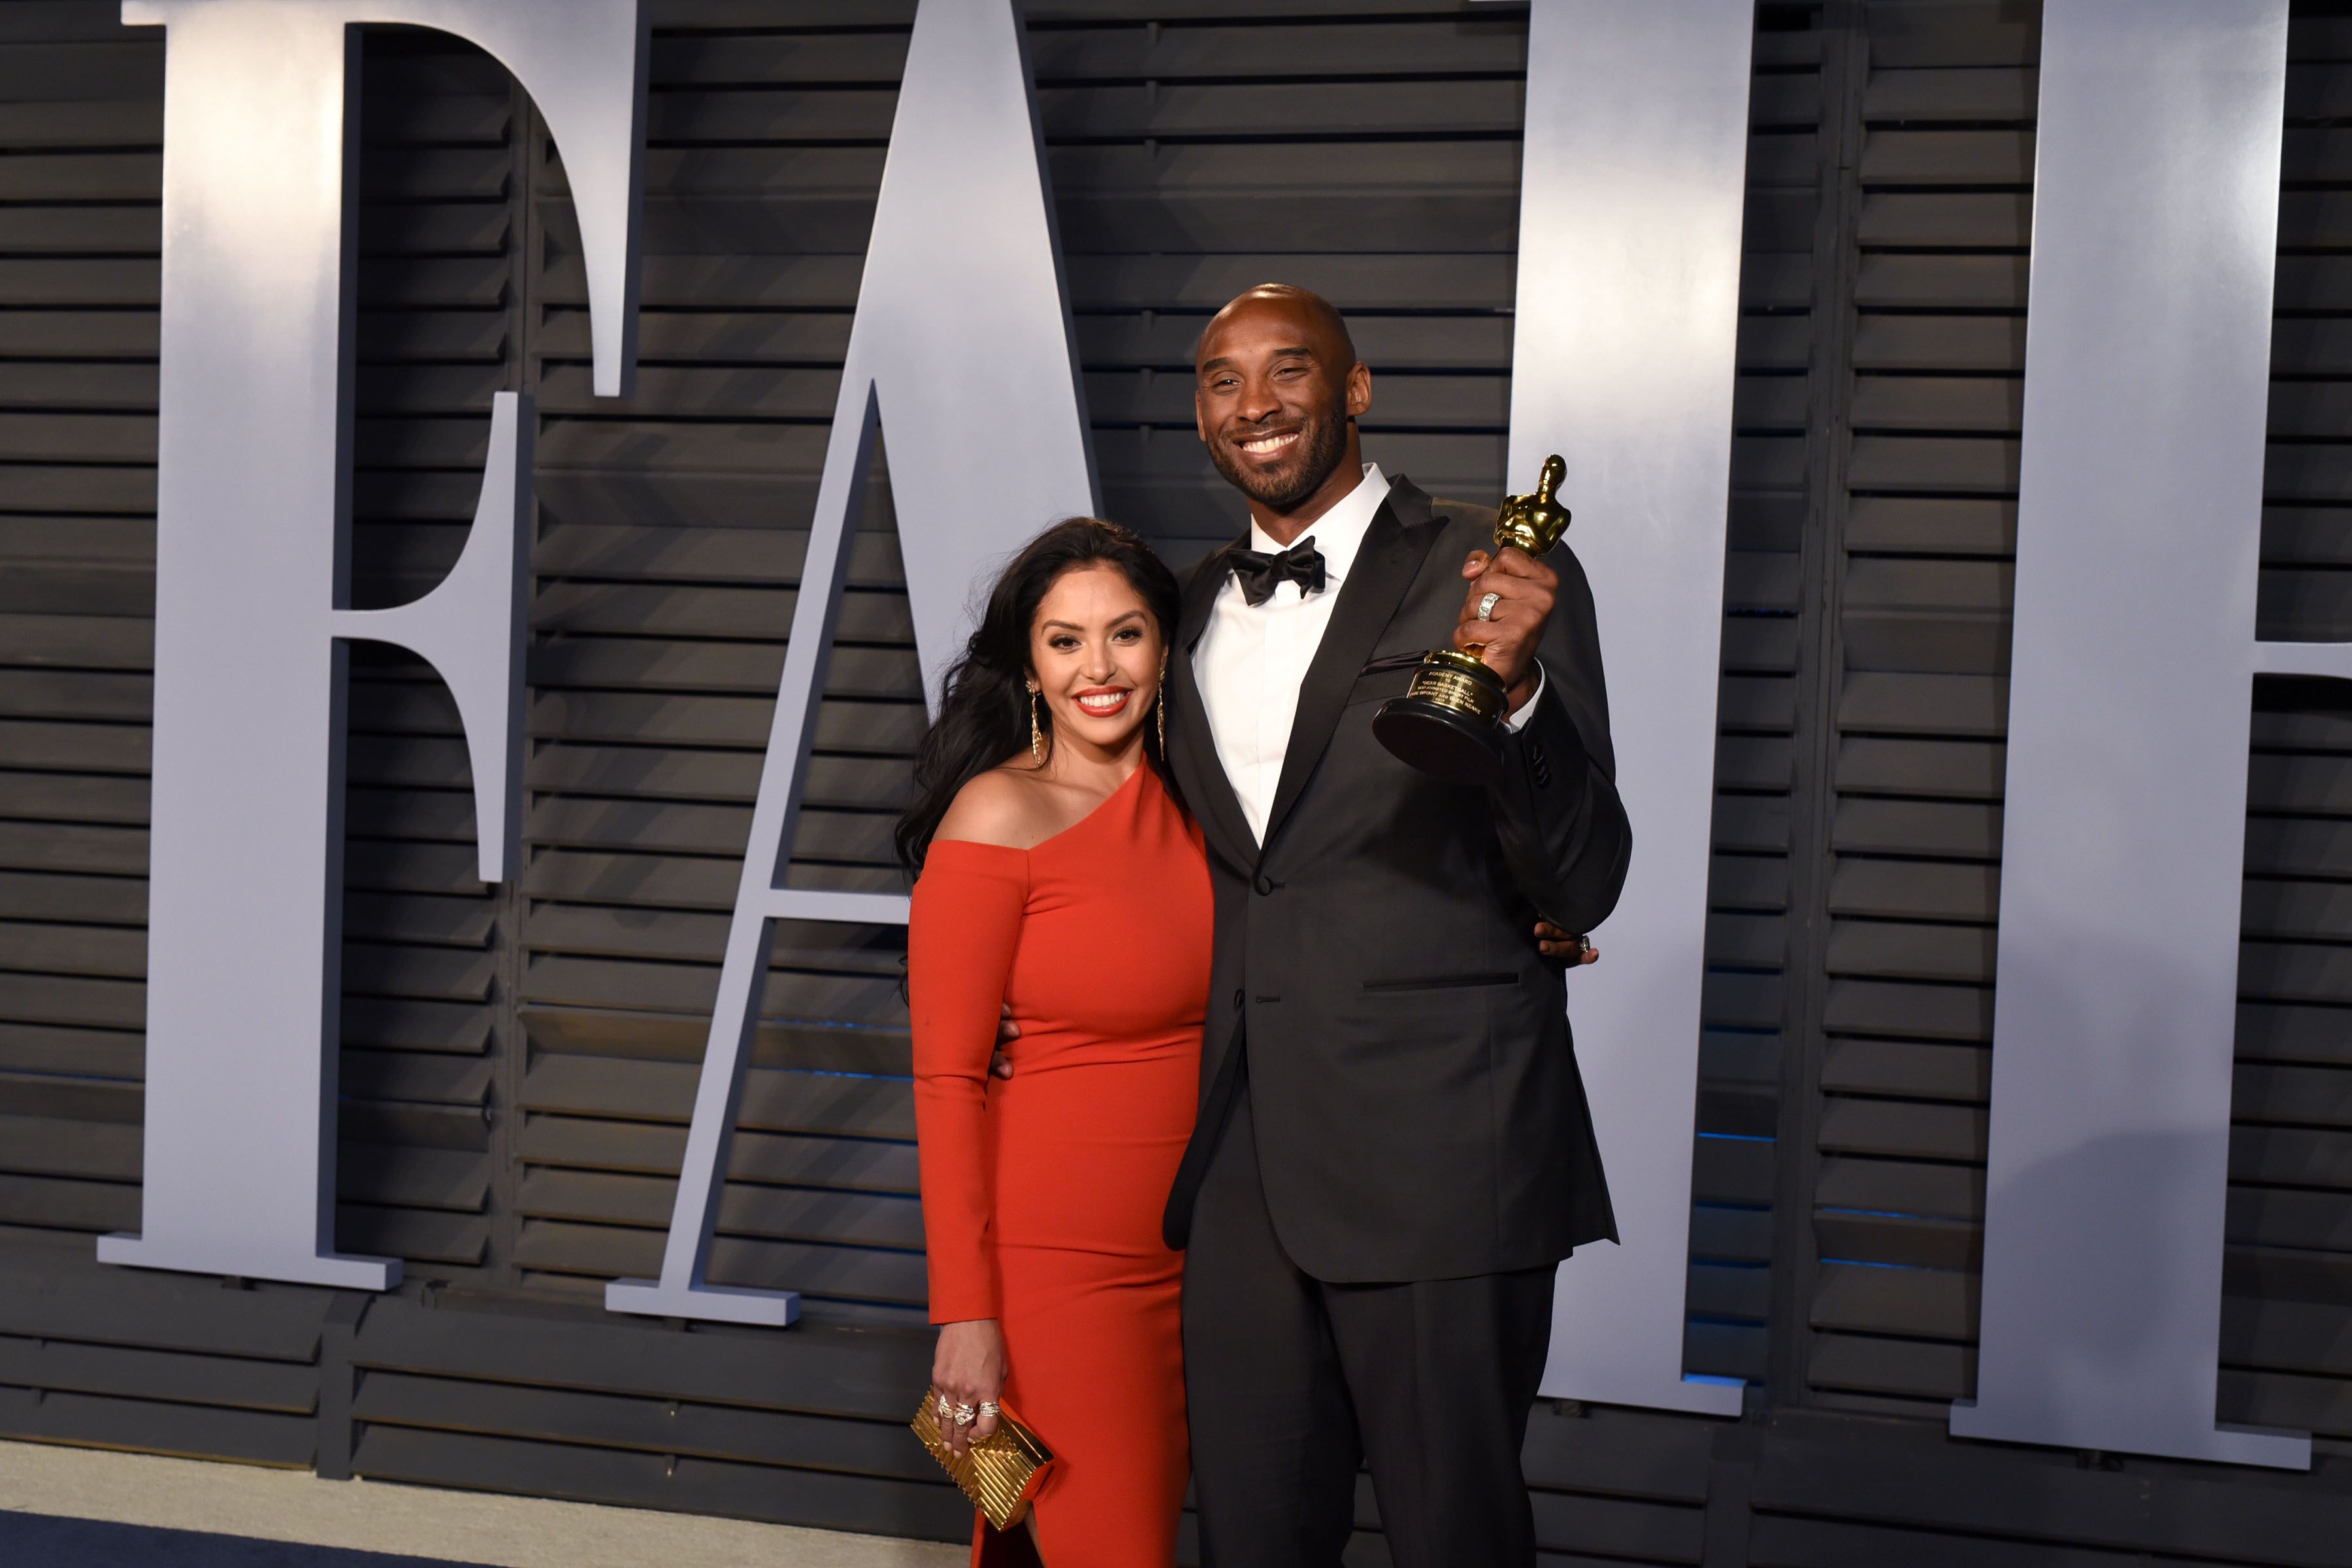 Vanessa Bryant and the late Kobe Bryant at the 2018 Vanity Fair Oscar Party at Wallis Annenberg Center for the Performing Arts on March 4, 2018 | Photo: Getty Images